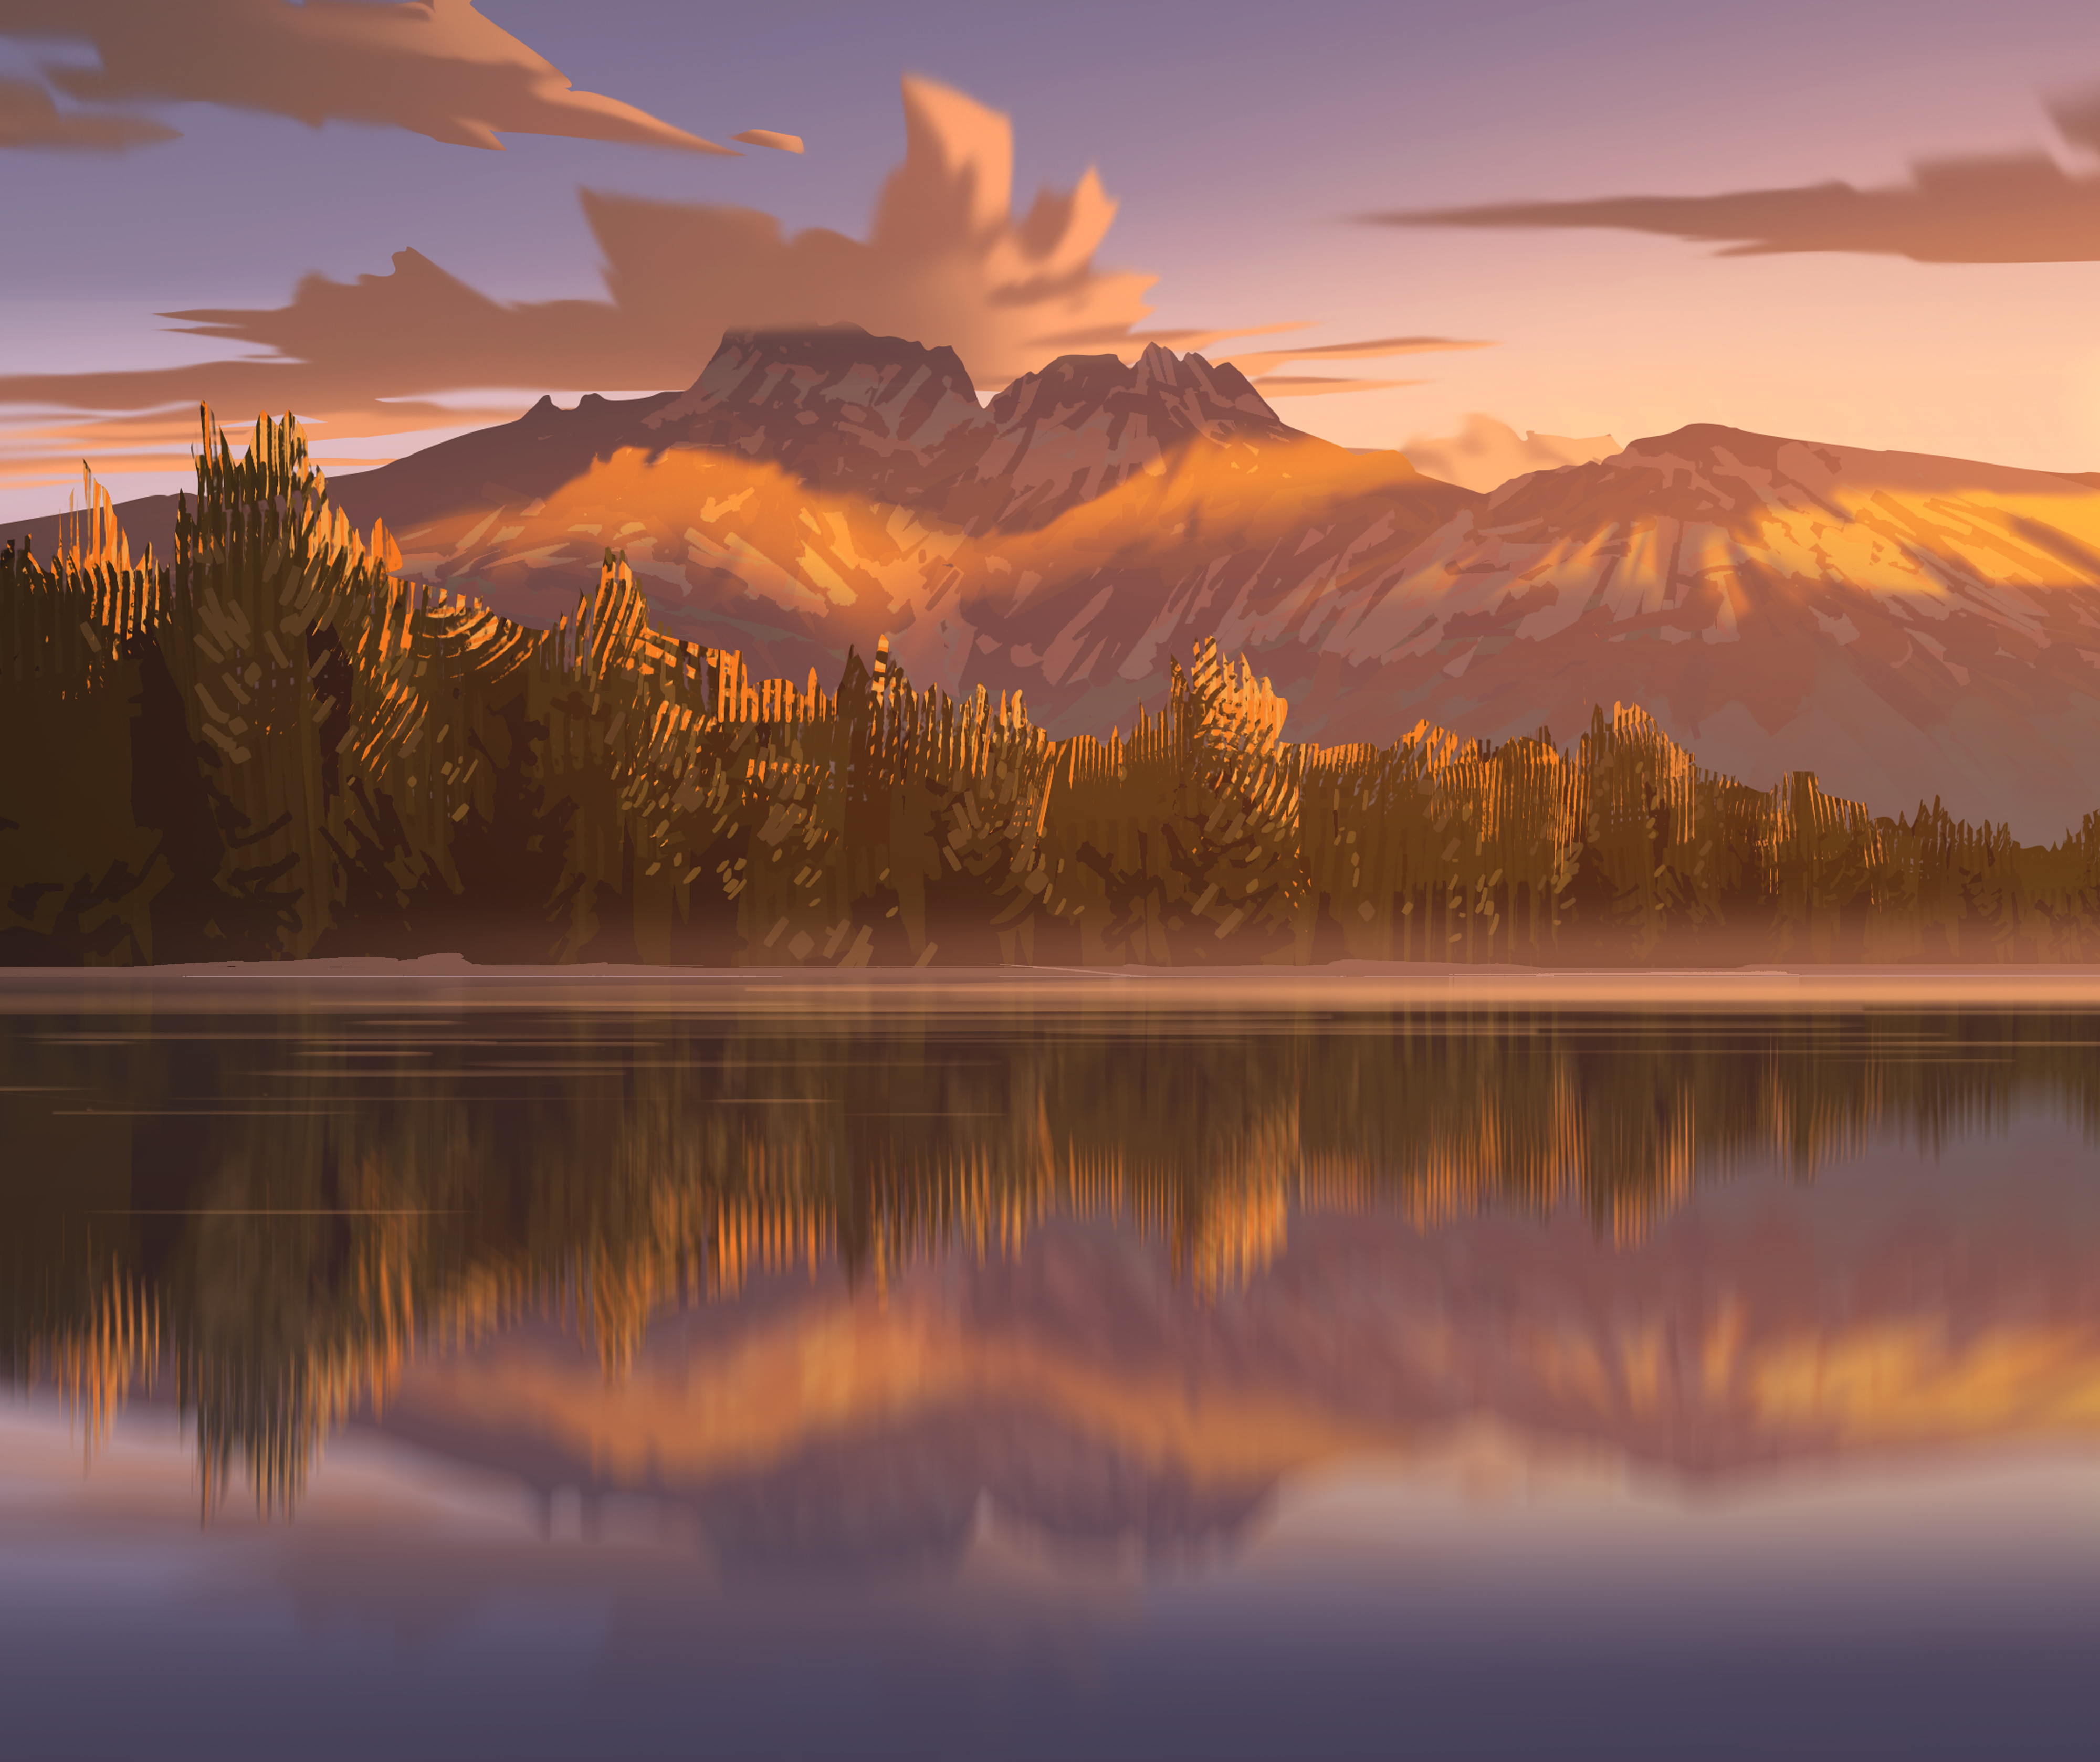 A Guide to Digital Painting in Procreate: Landscapes & Plein Air